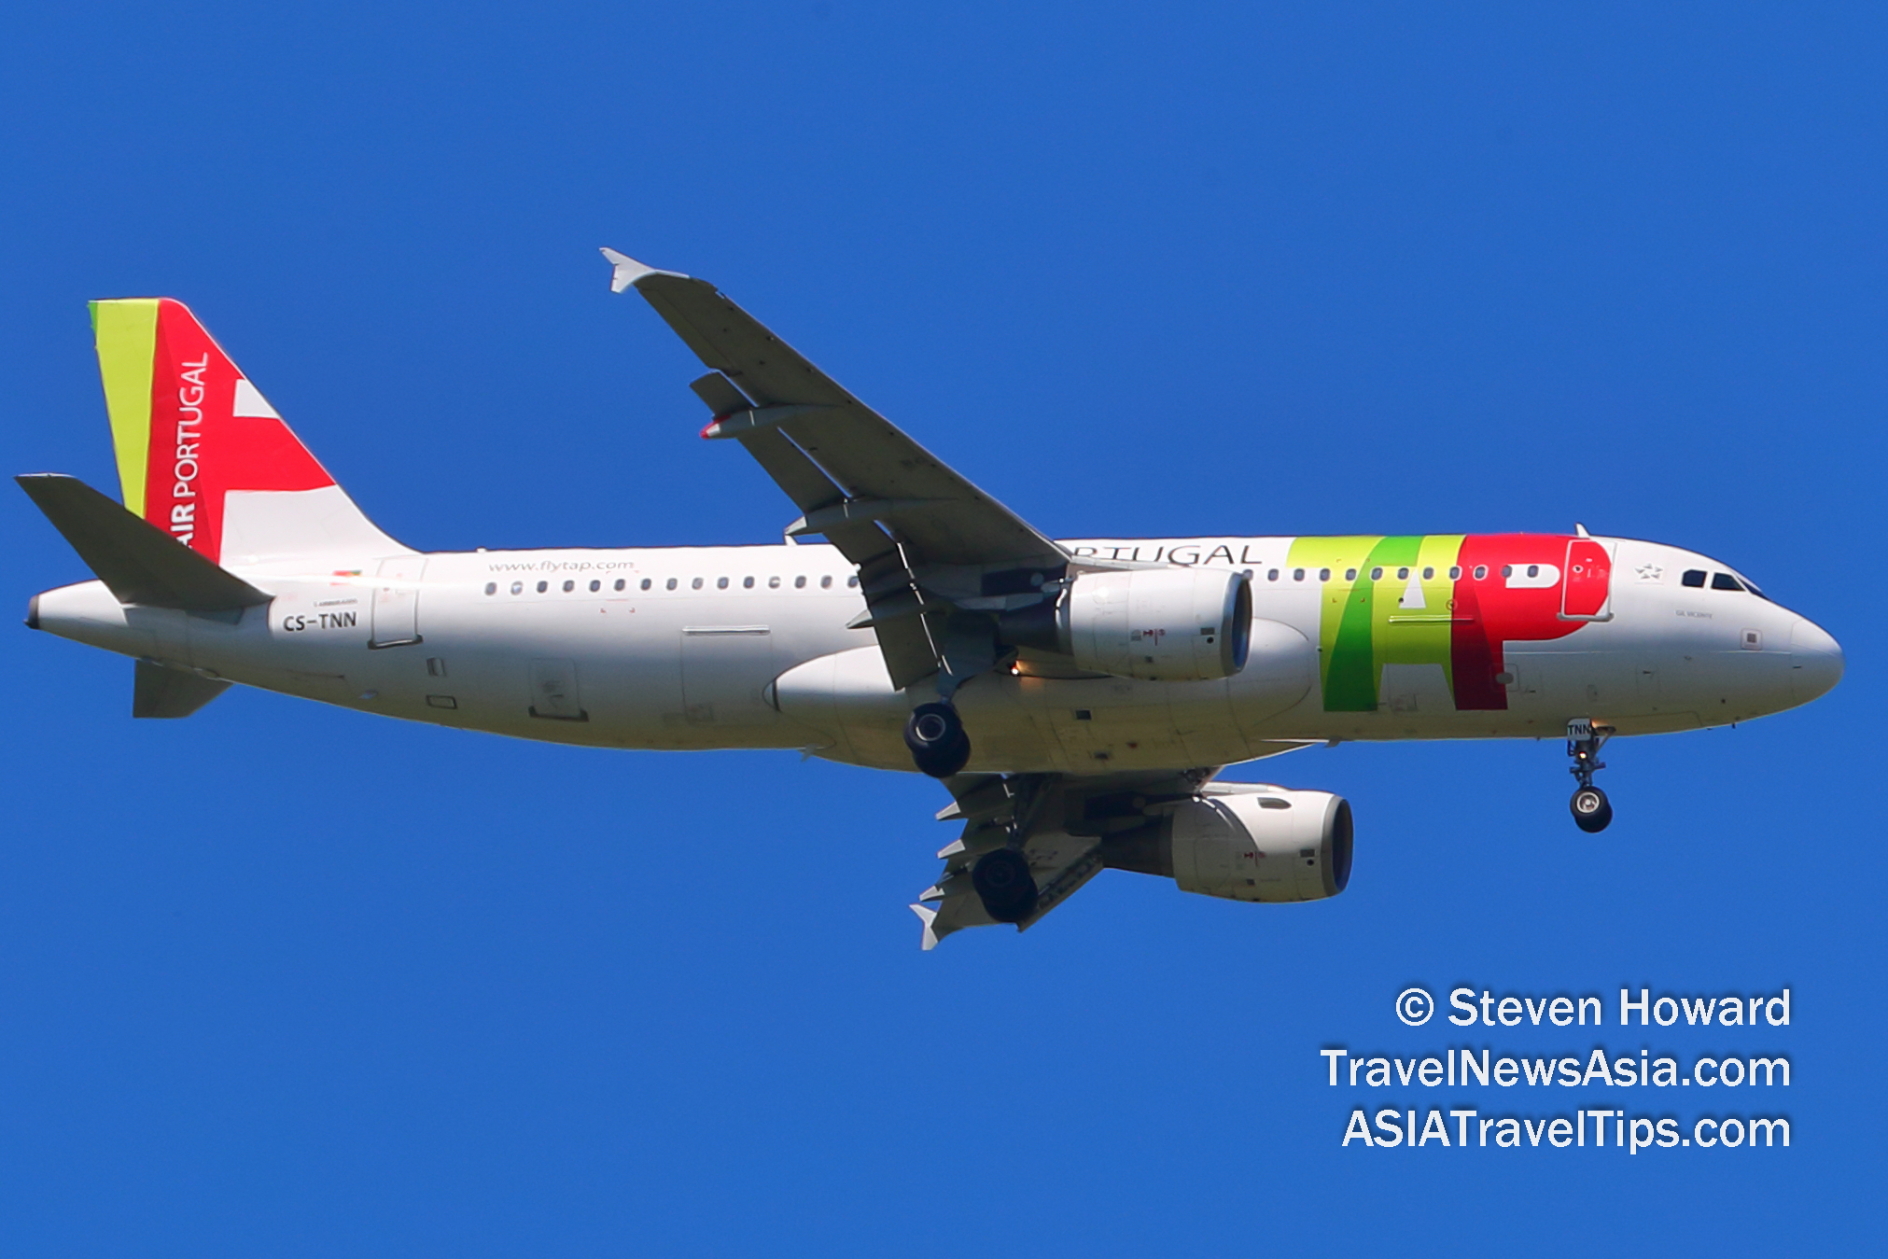 TAP Portugal A320 reg: CS-TNN. Picture by Steven Howard of TravelNewsAsia.com Click to enlarge.